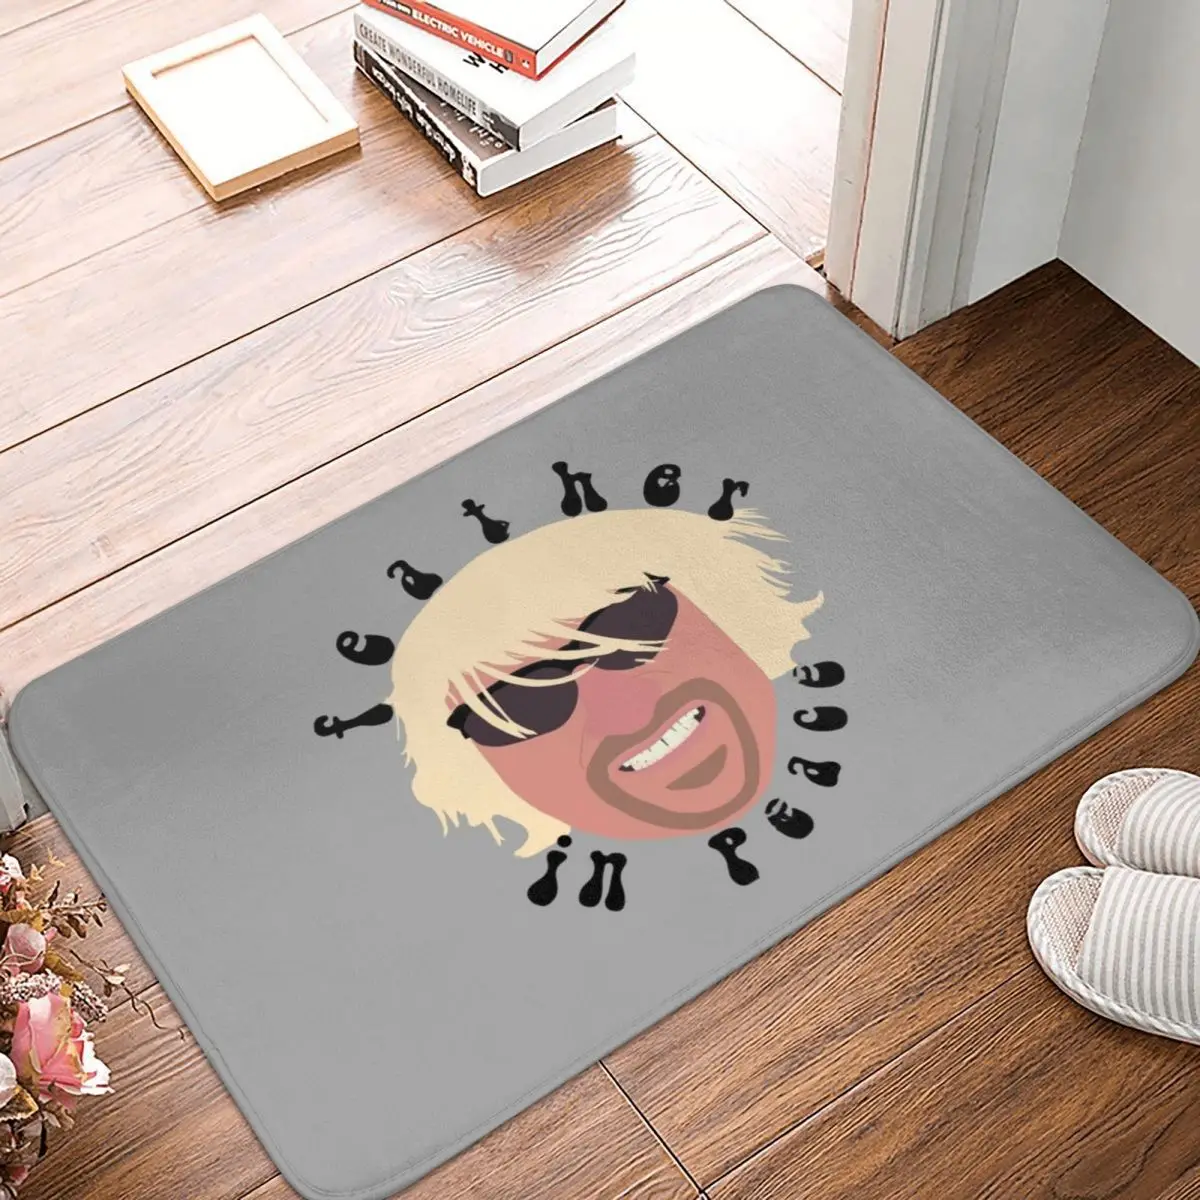 

Feather In Peace Brother Doormat Rug carpet Mat Footpad Non-slip Water oil proofEntrance Kitchen Bedroom balcony Cartoon